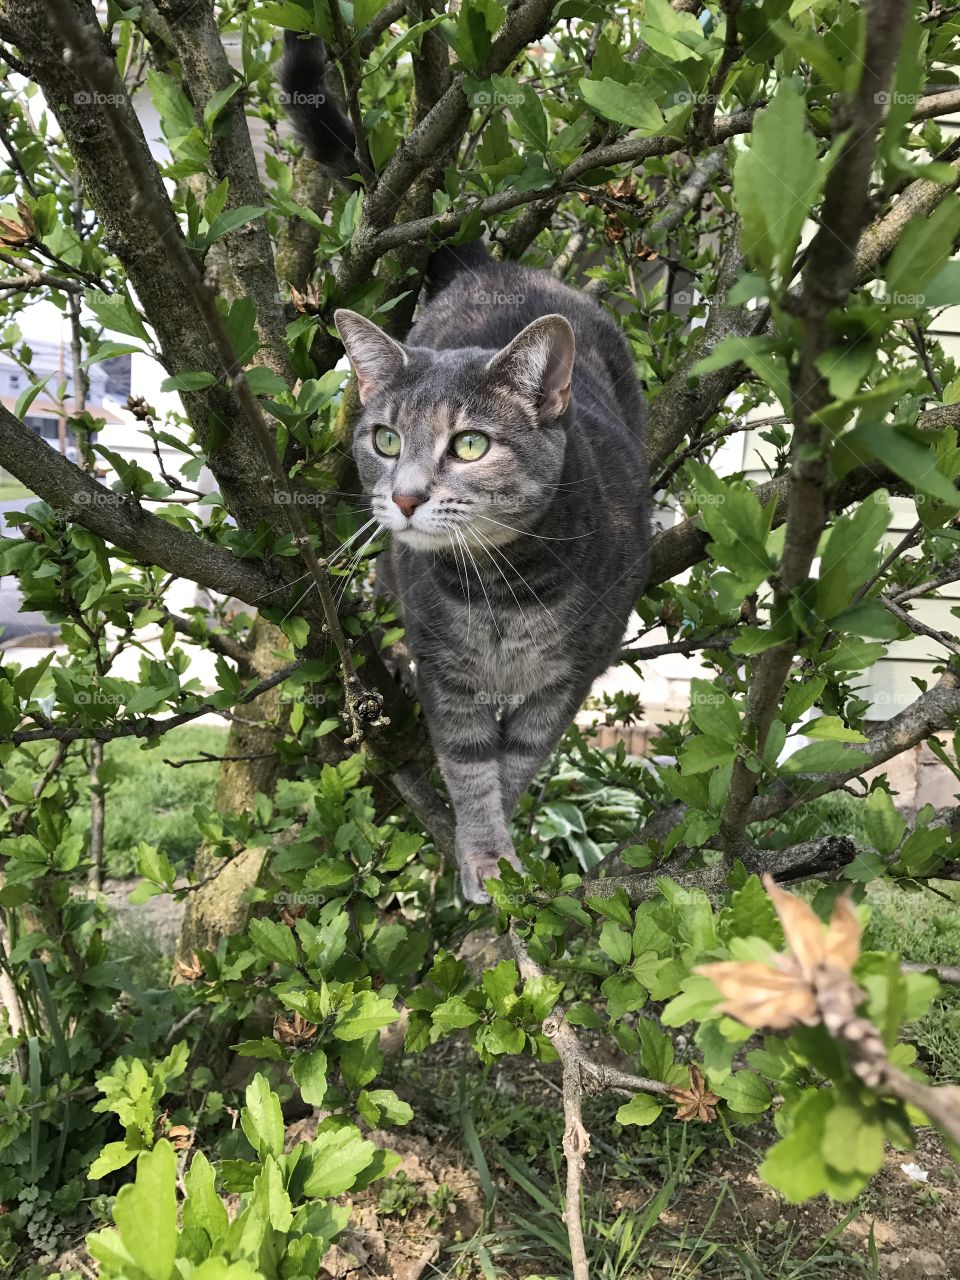 Tela’s day out! This cat loves climbing trees and watching birds! She is so gorgeous! 